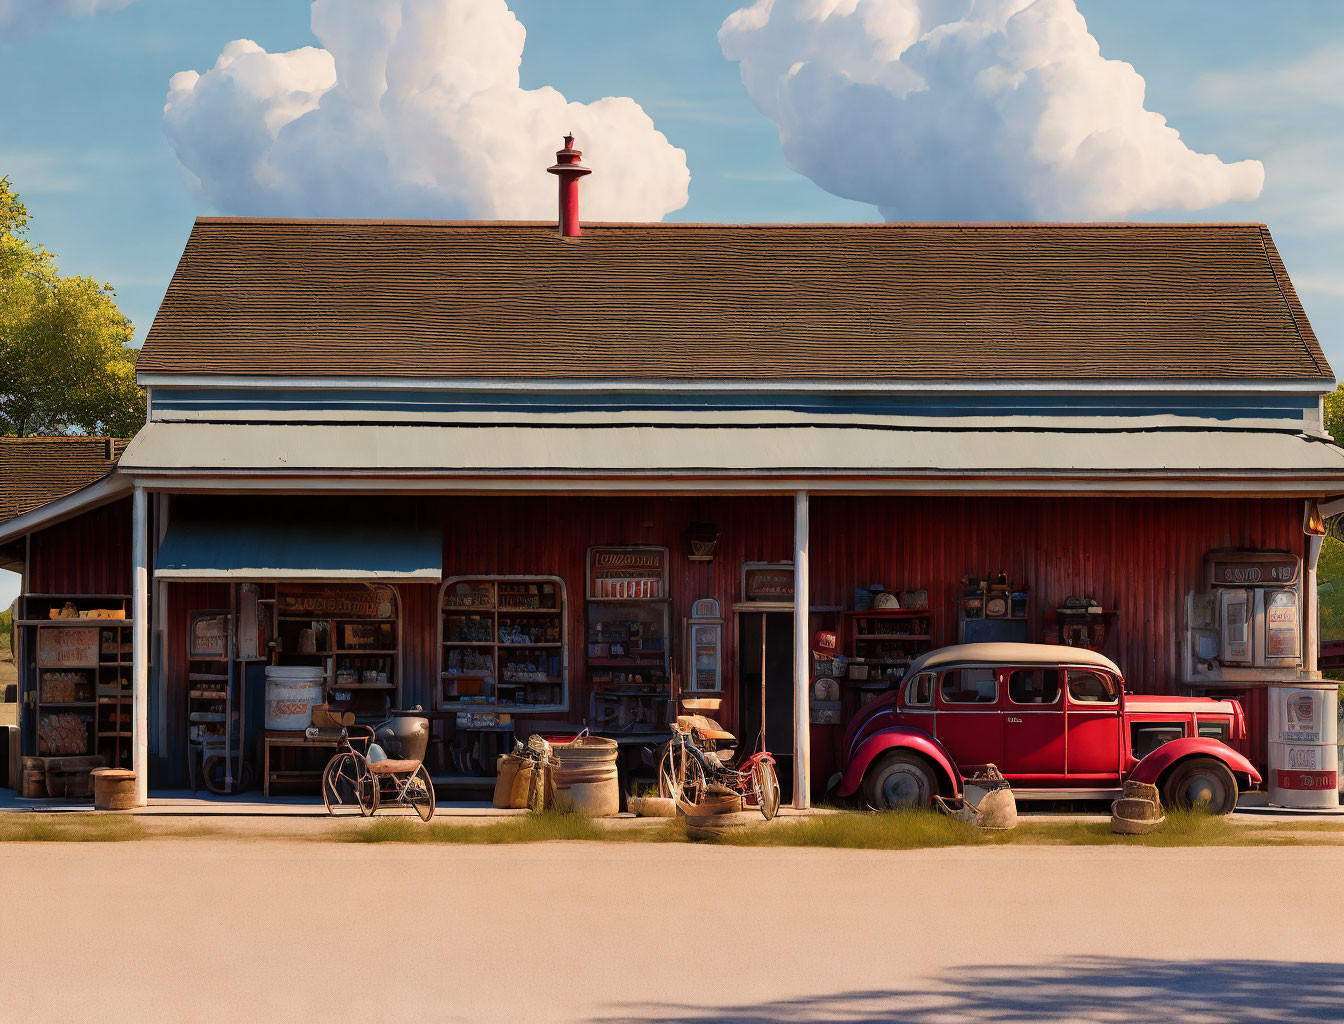 Vintage-style shop with items and red car under sunny sky